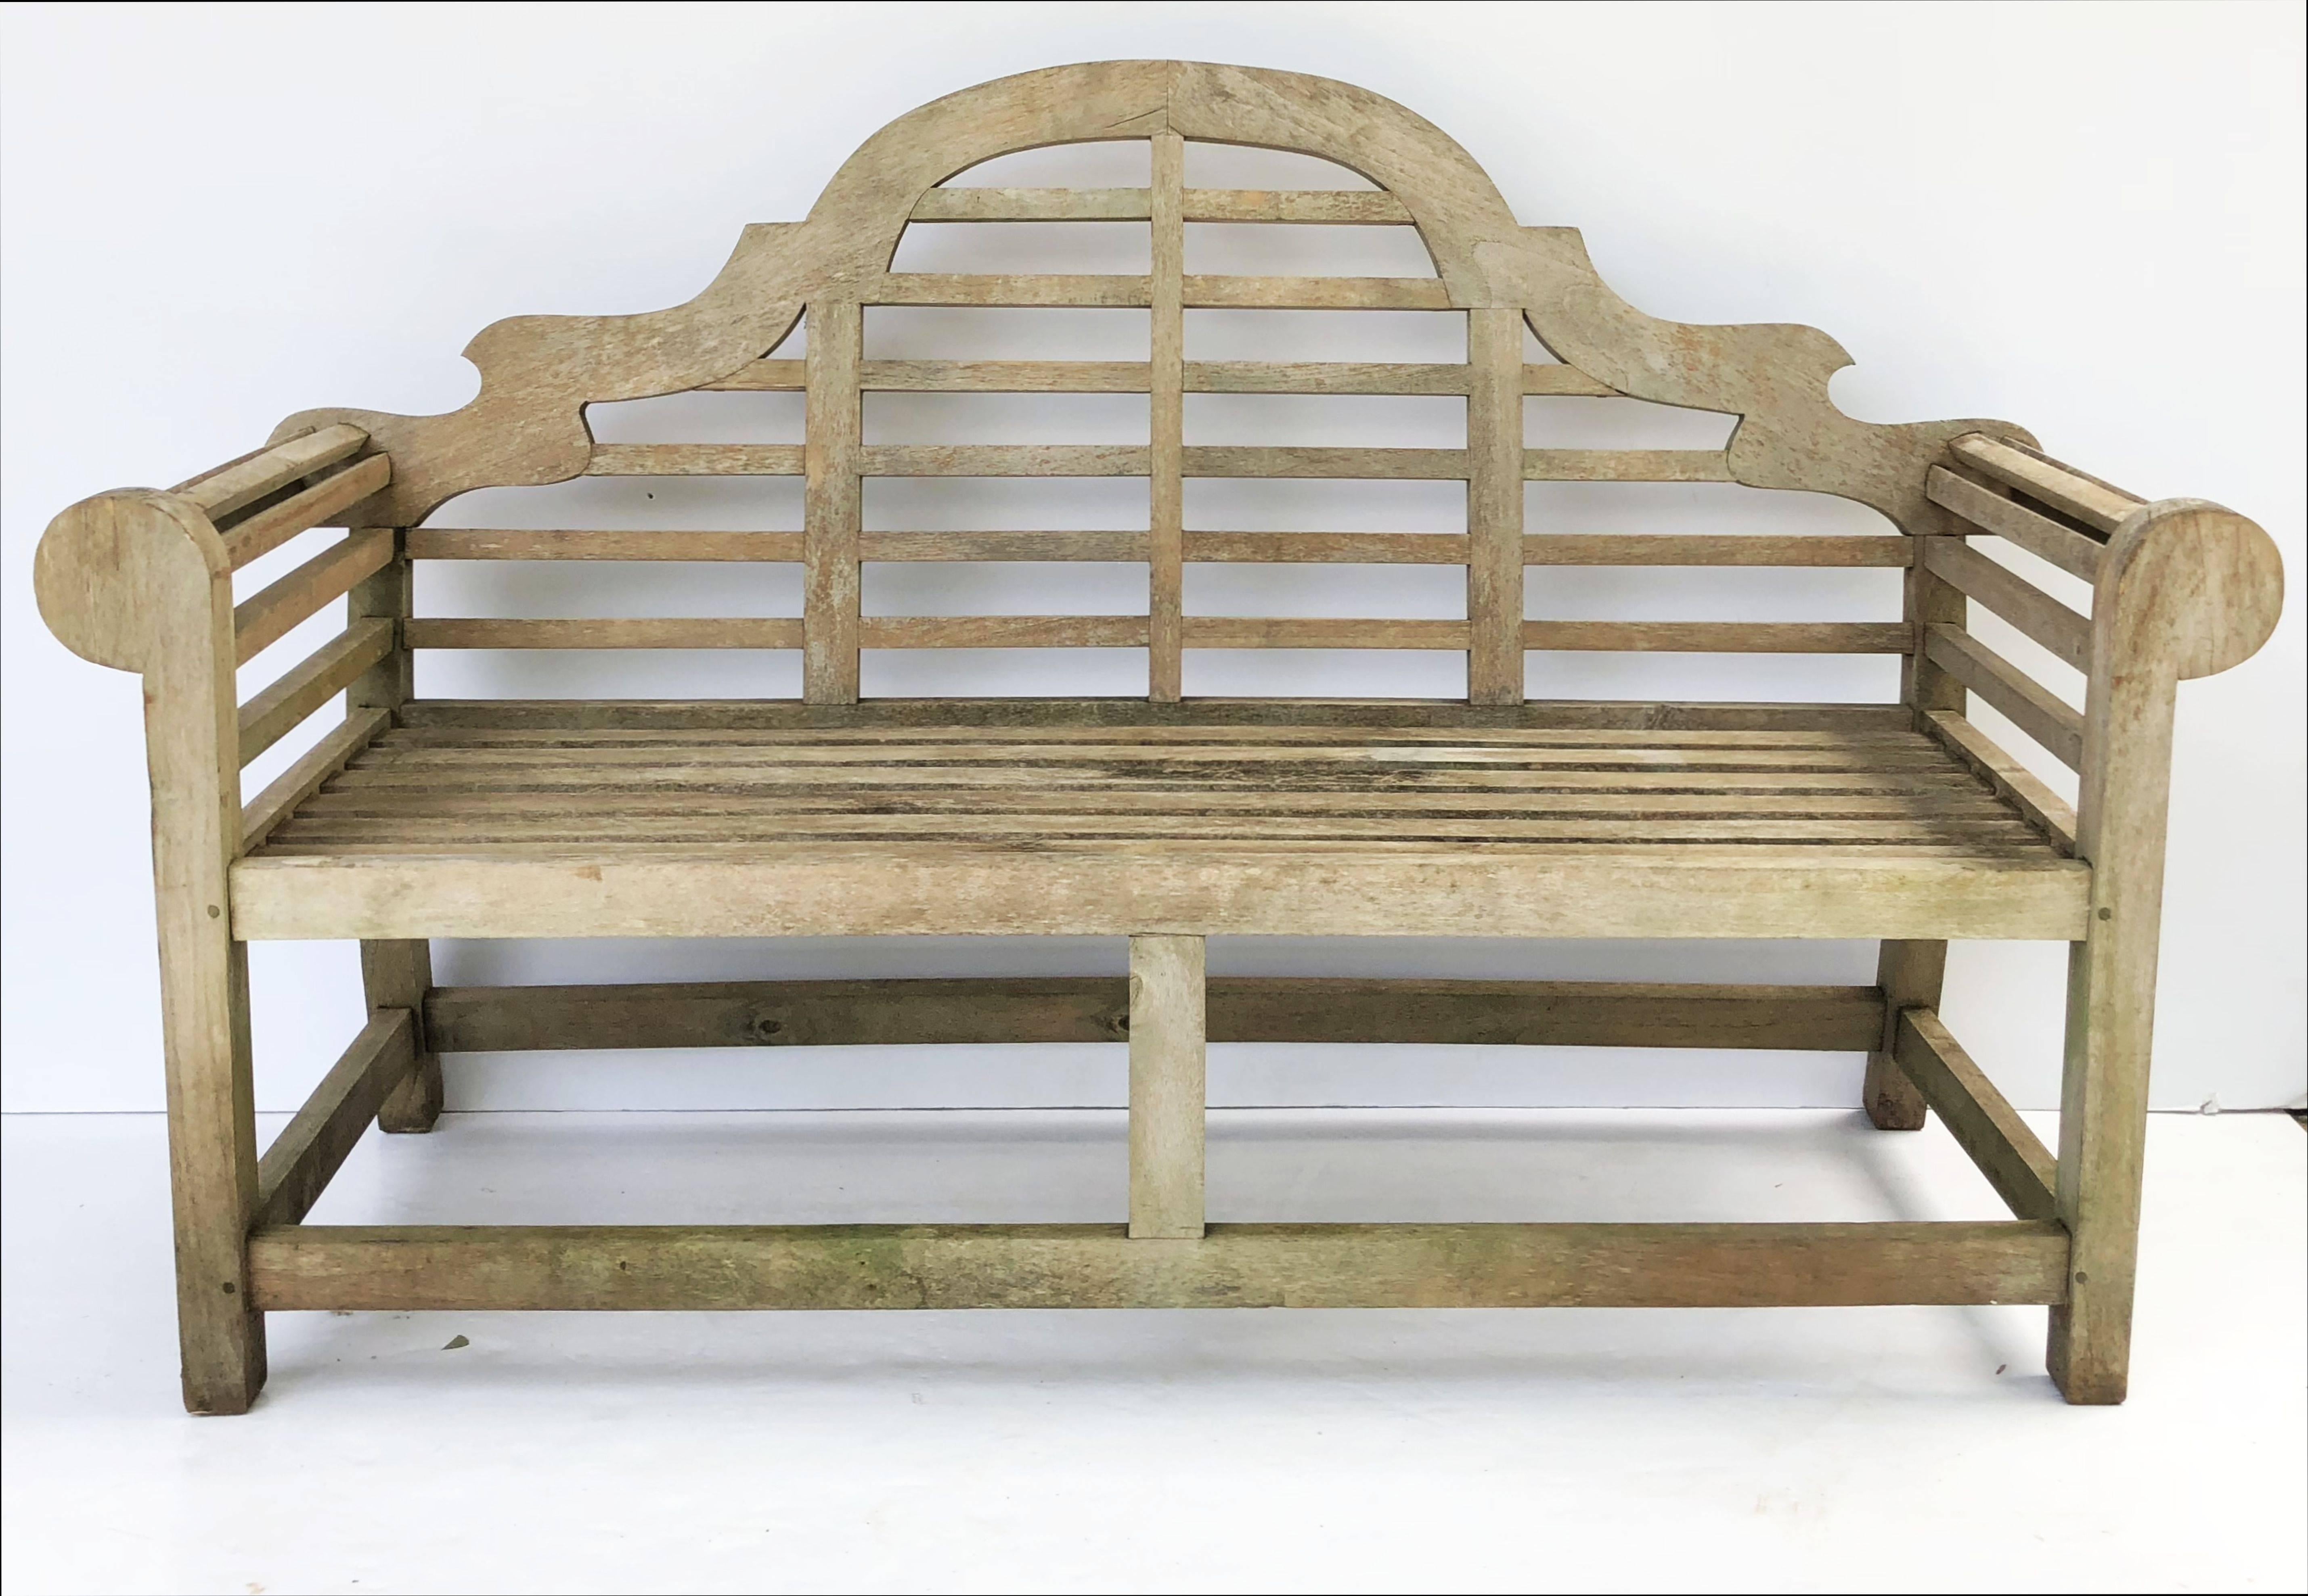 A fine near pair of vintage Lutyens style teak garden benches after Sir Edwin Lutyens, the British architect renowned for his imaginative, classic designs throughout England, Ireland and New Delhi (India).

Each bench featuring a high-arched back